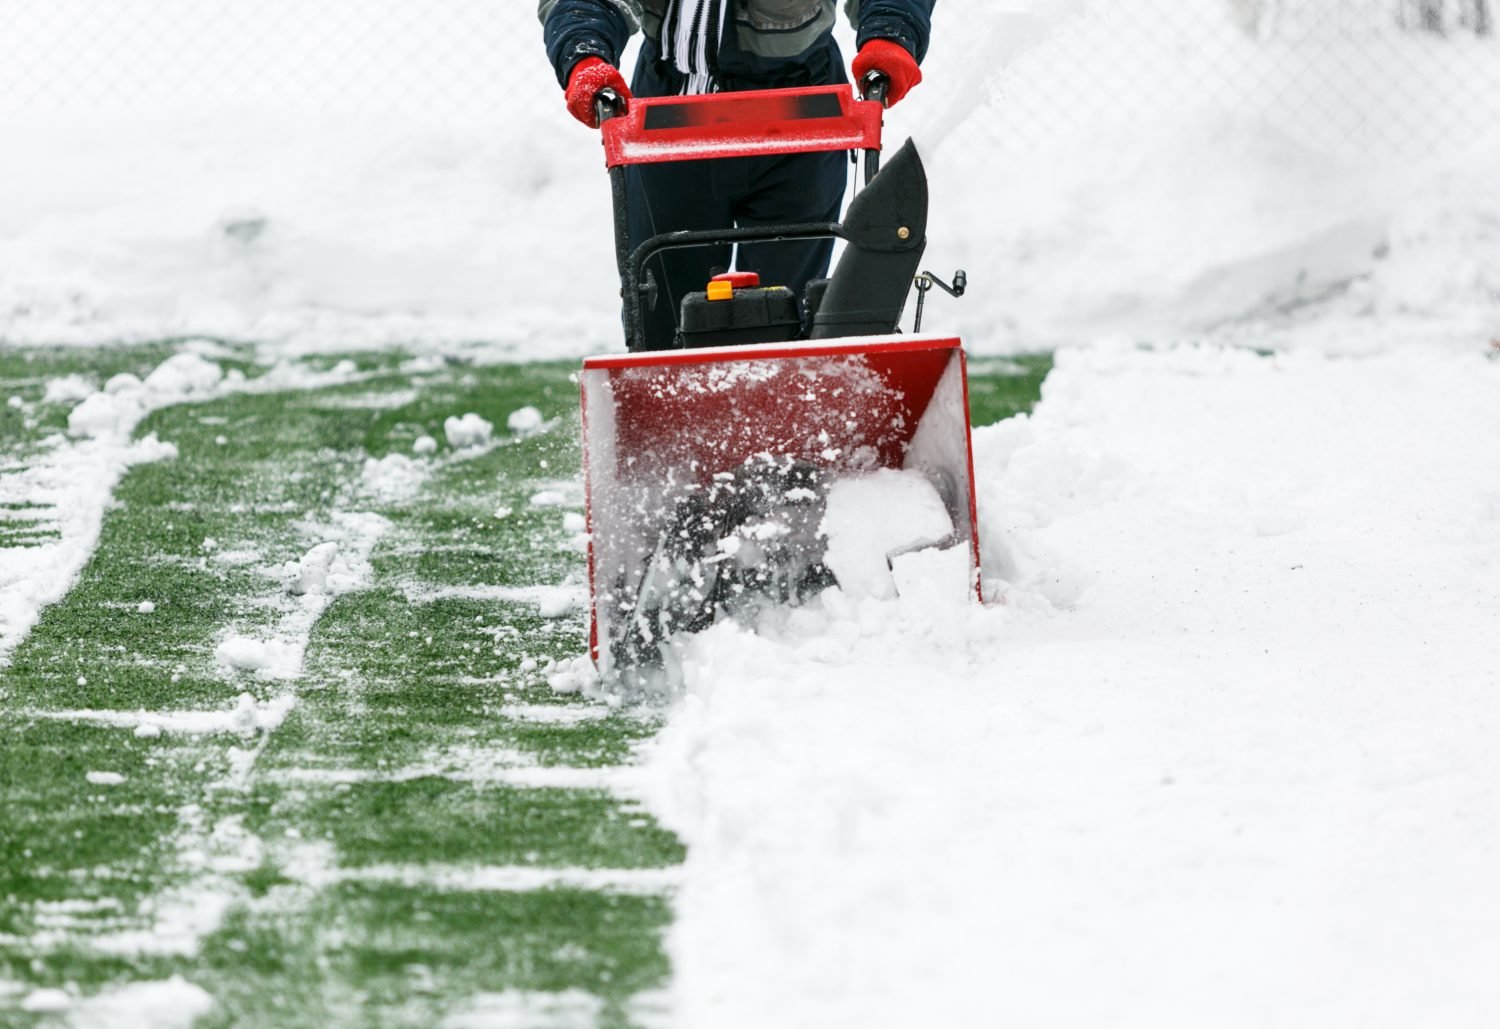 Man using a snow blower to remove large amounts of snow on football field. Man cleans snow with a snow-removing machine on soccer pitch.